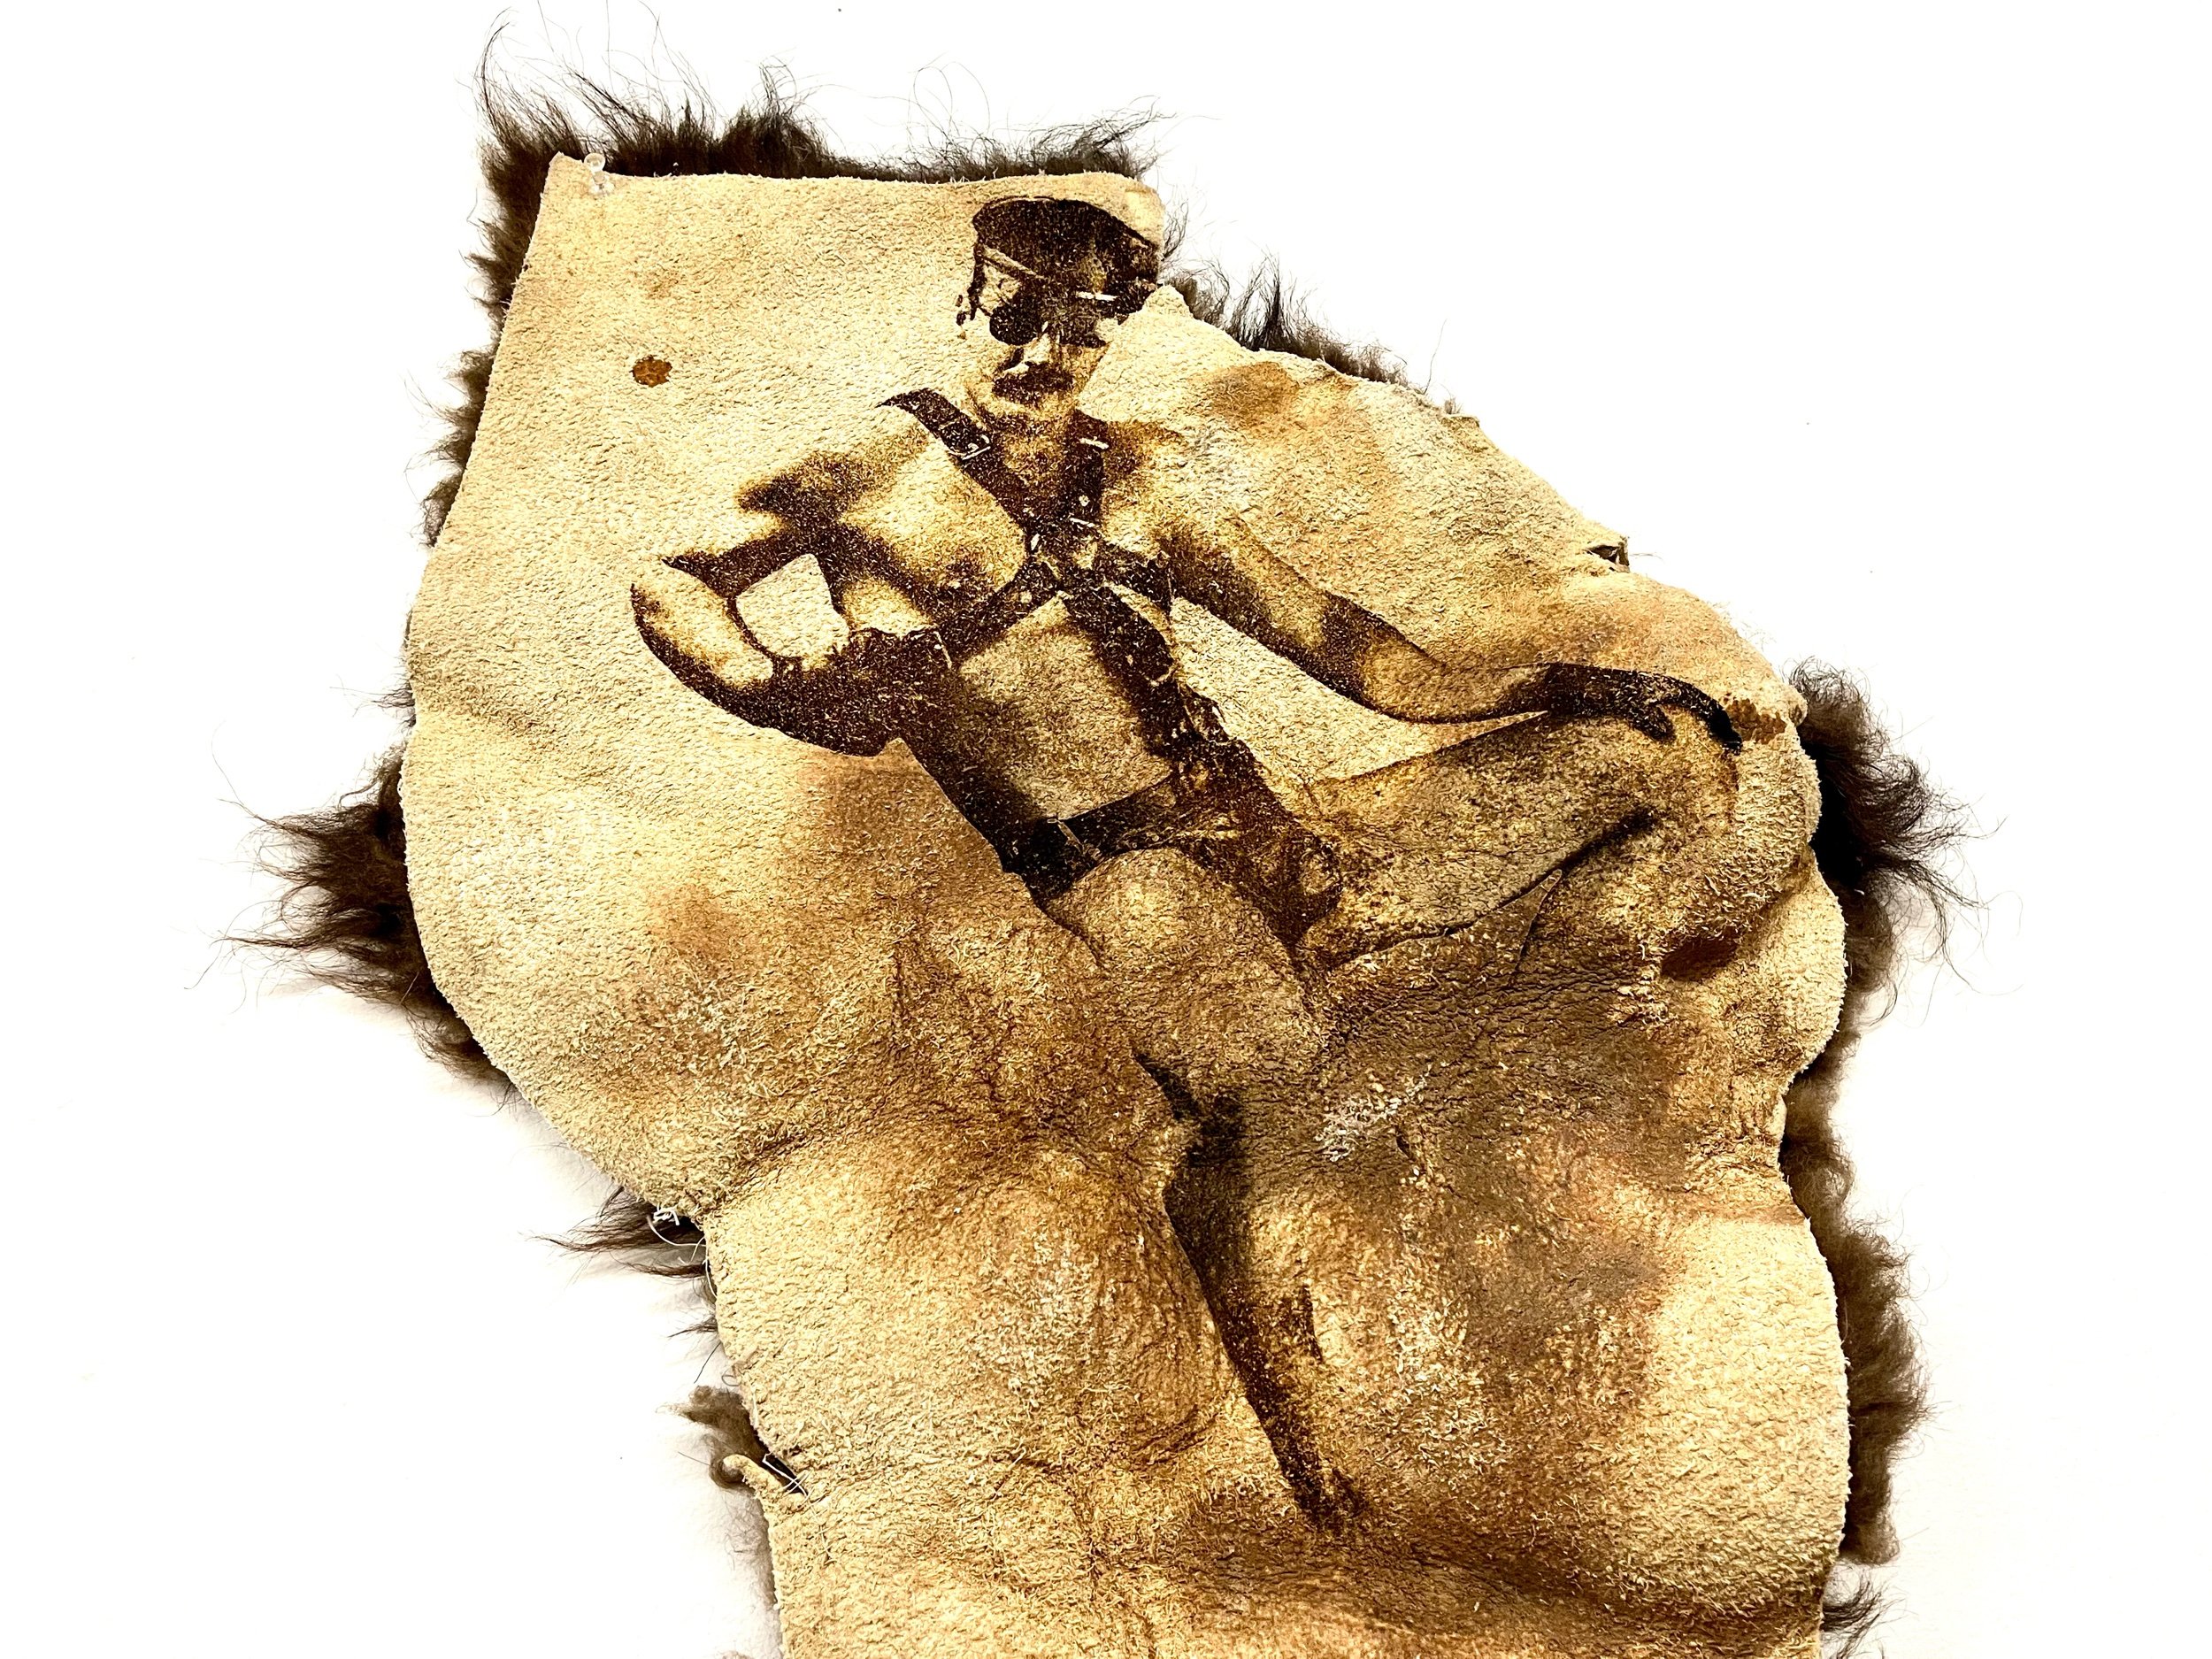  In my exploration of the intersection between Queerness, leather culture, and the hunt, I am delving into the realm of bison hides and using a laser-etched image-making process. This artistic endeavor aims to dive into the nuanced layers associated 